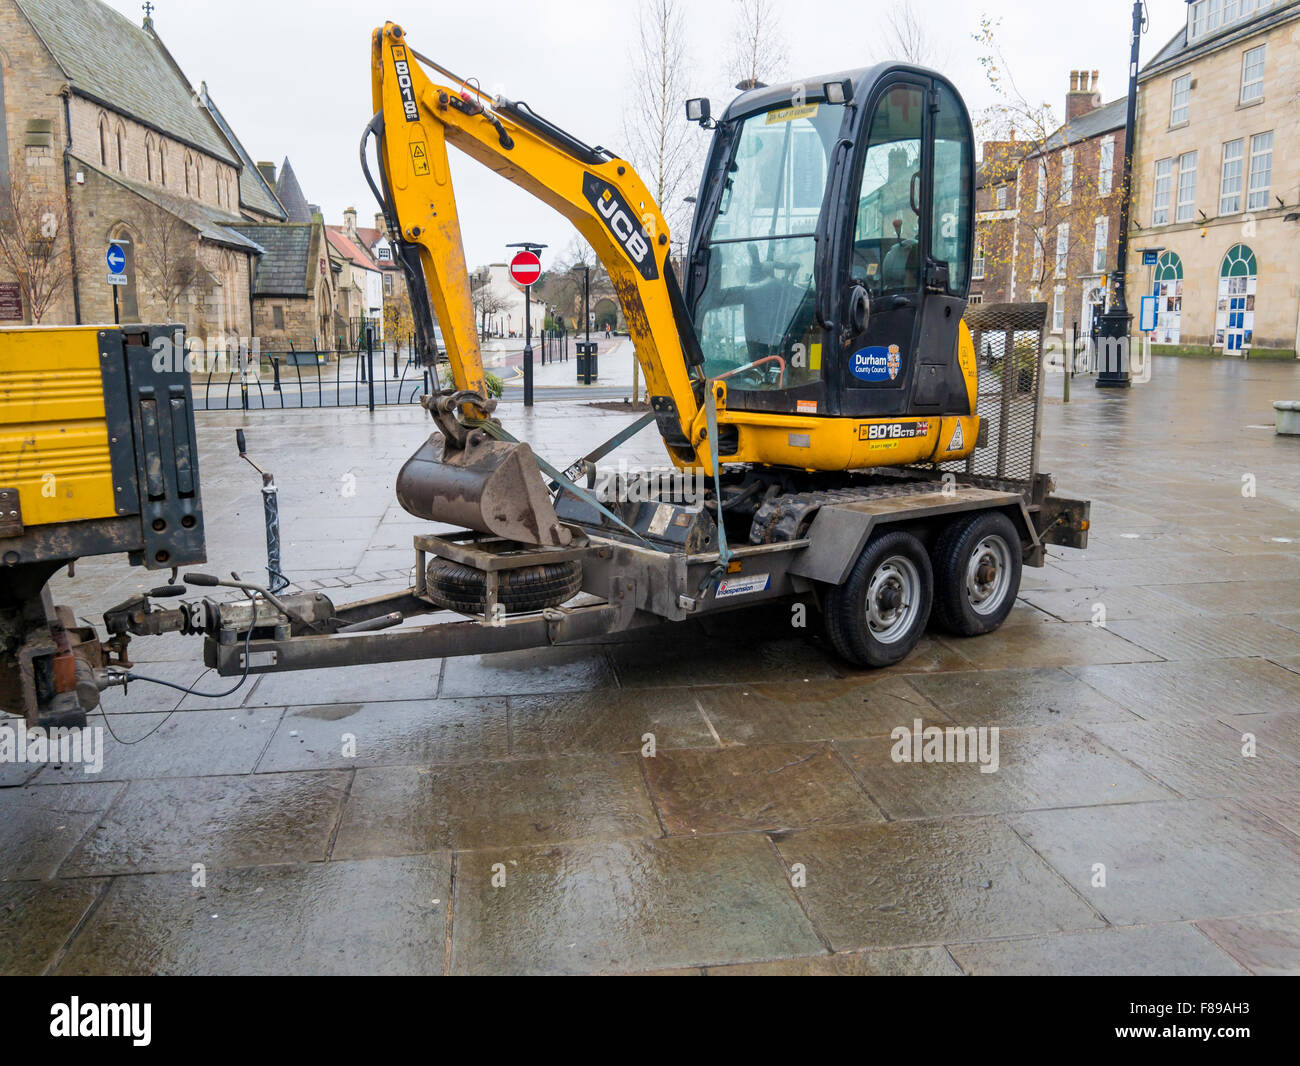 JCB 8018 Mini Digger Excavator in a town centre on a railer for transportation Stock Photo